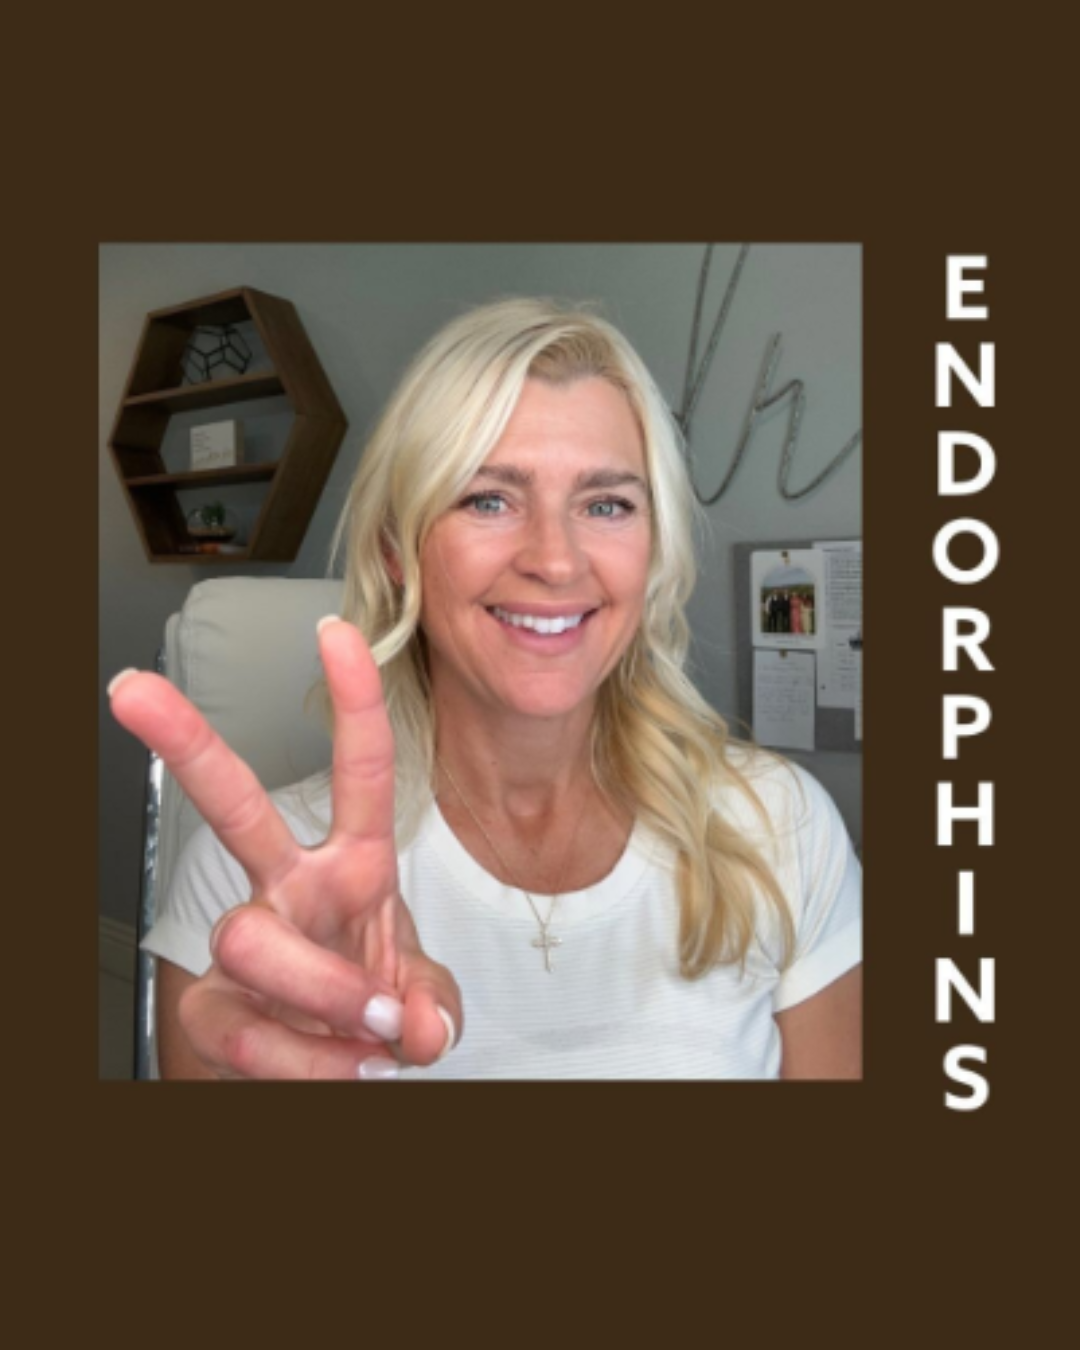 endorphins endorphin hormone integrative steps The 5 "C" Ways to Naturally Boost Endorphins for a Happier You